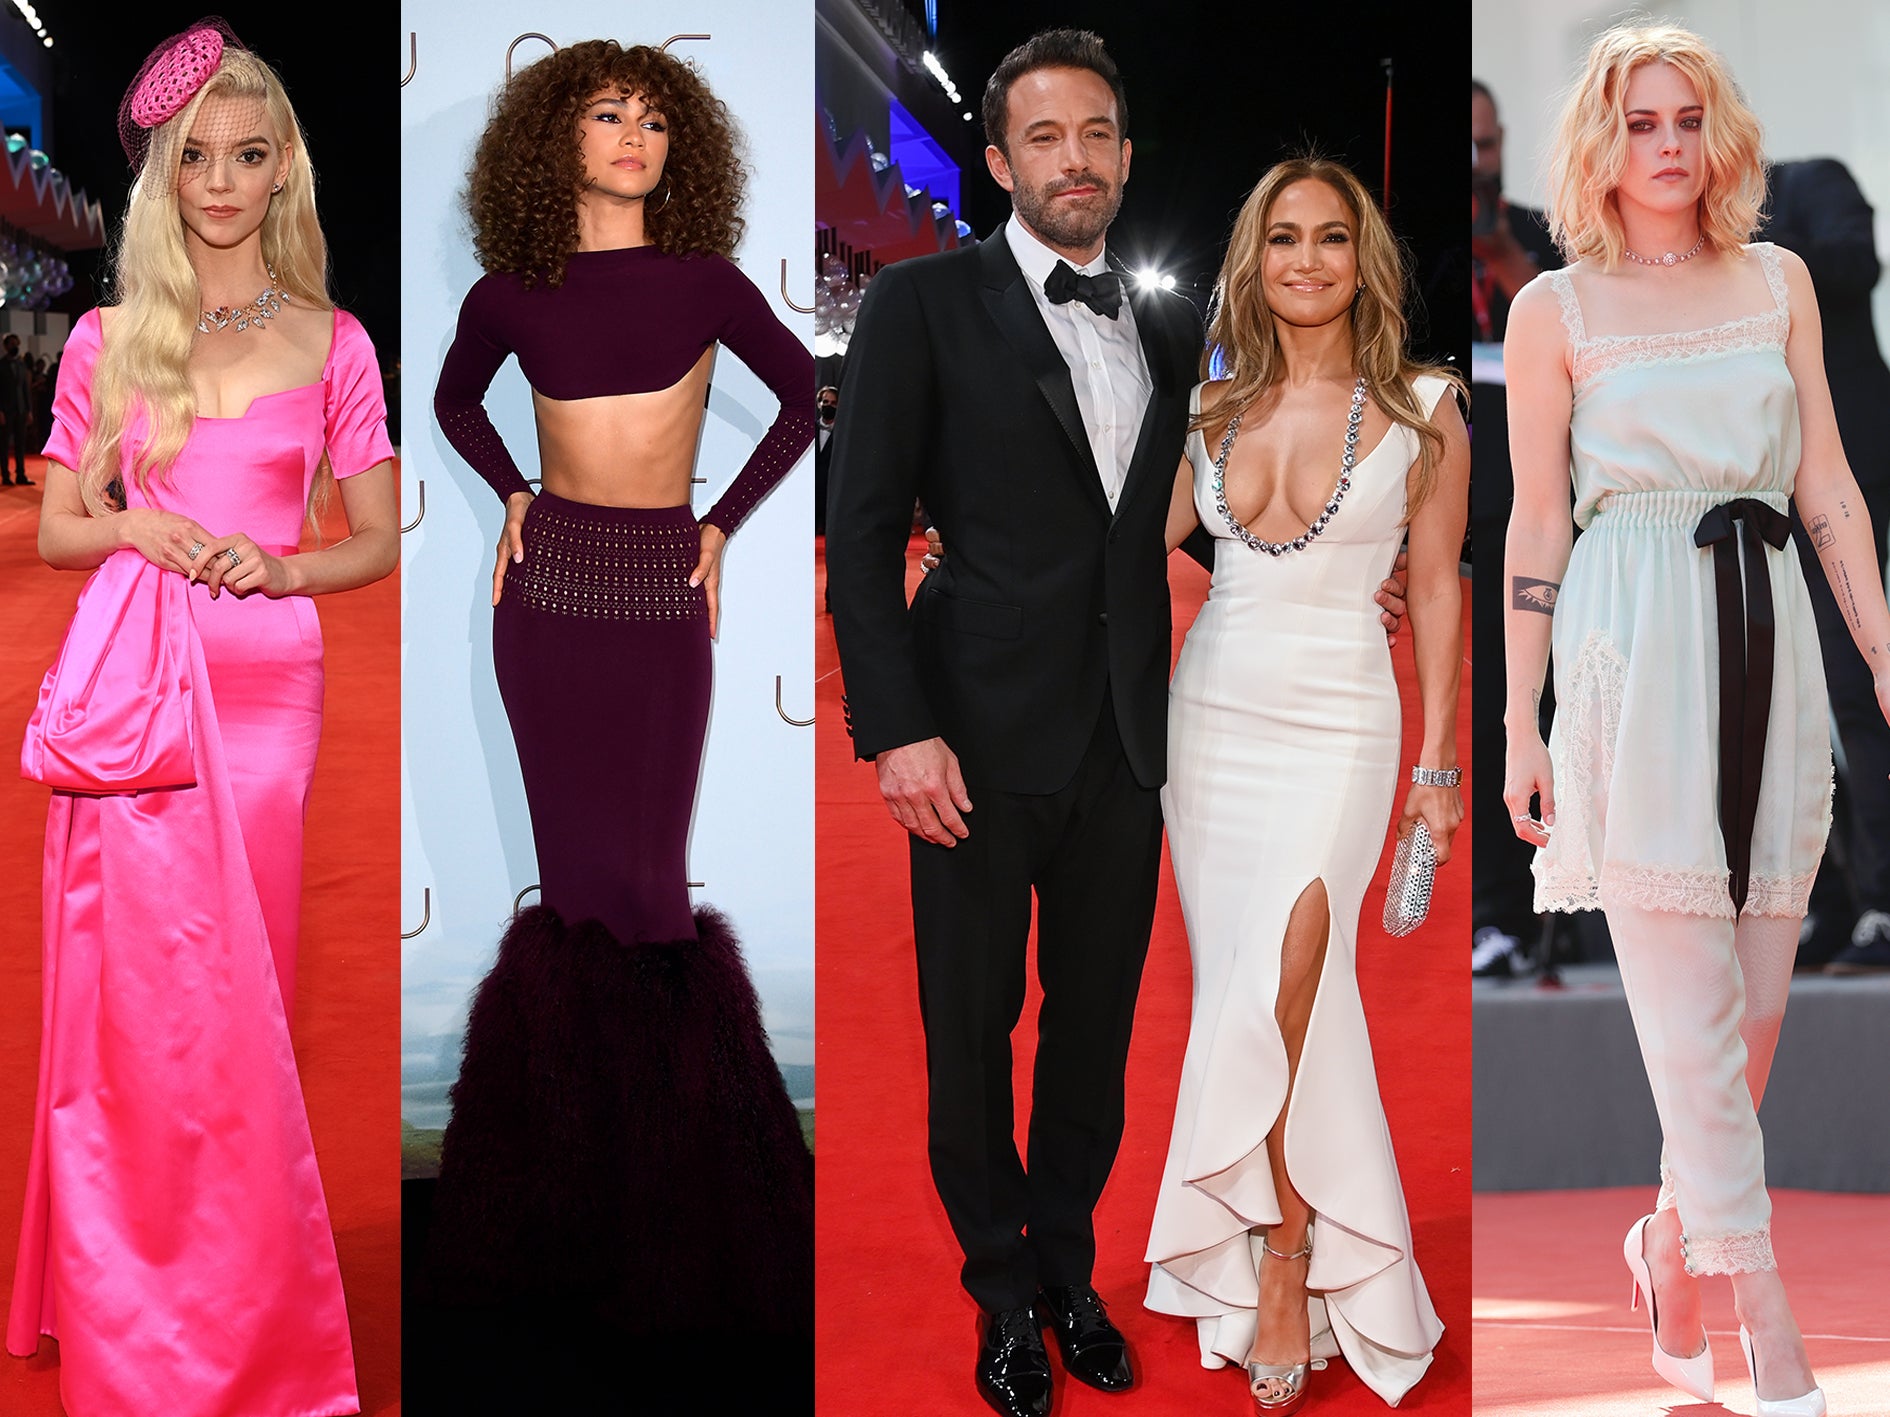 The Best-Dressed Stars from Last Night